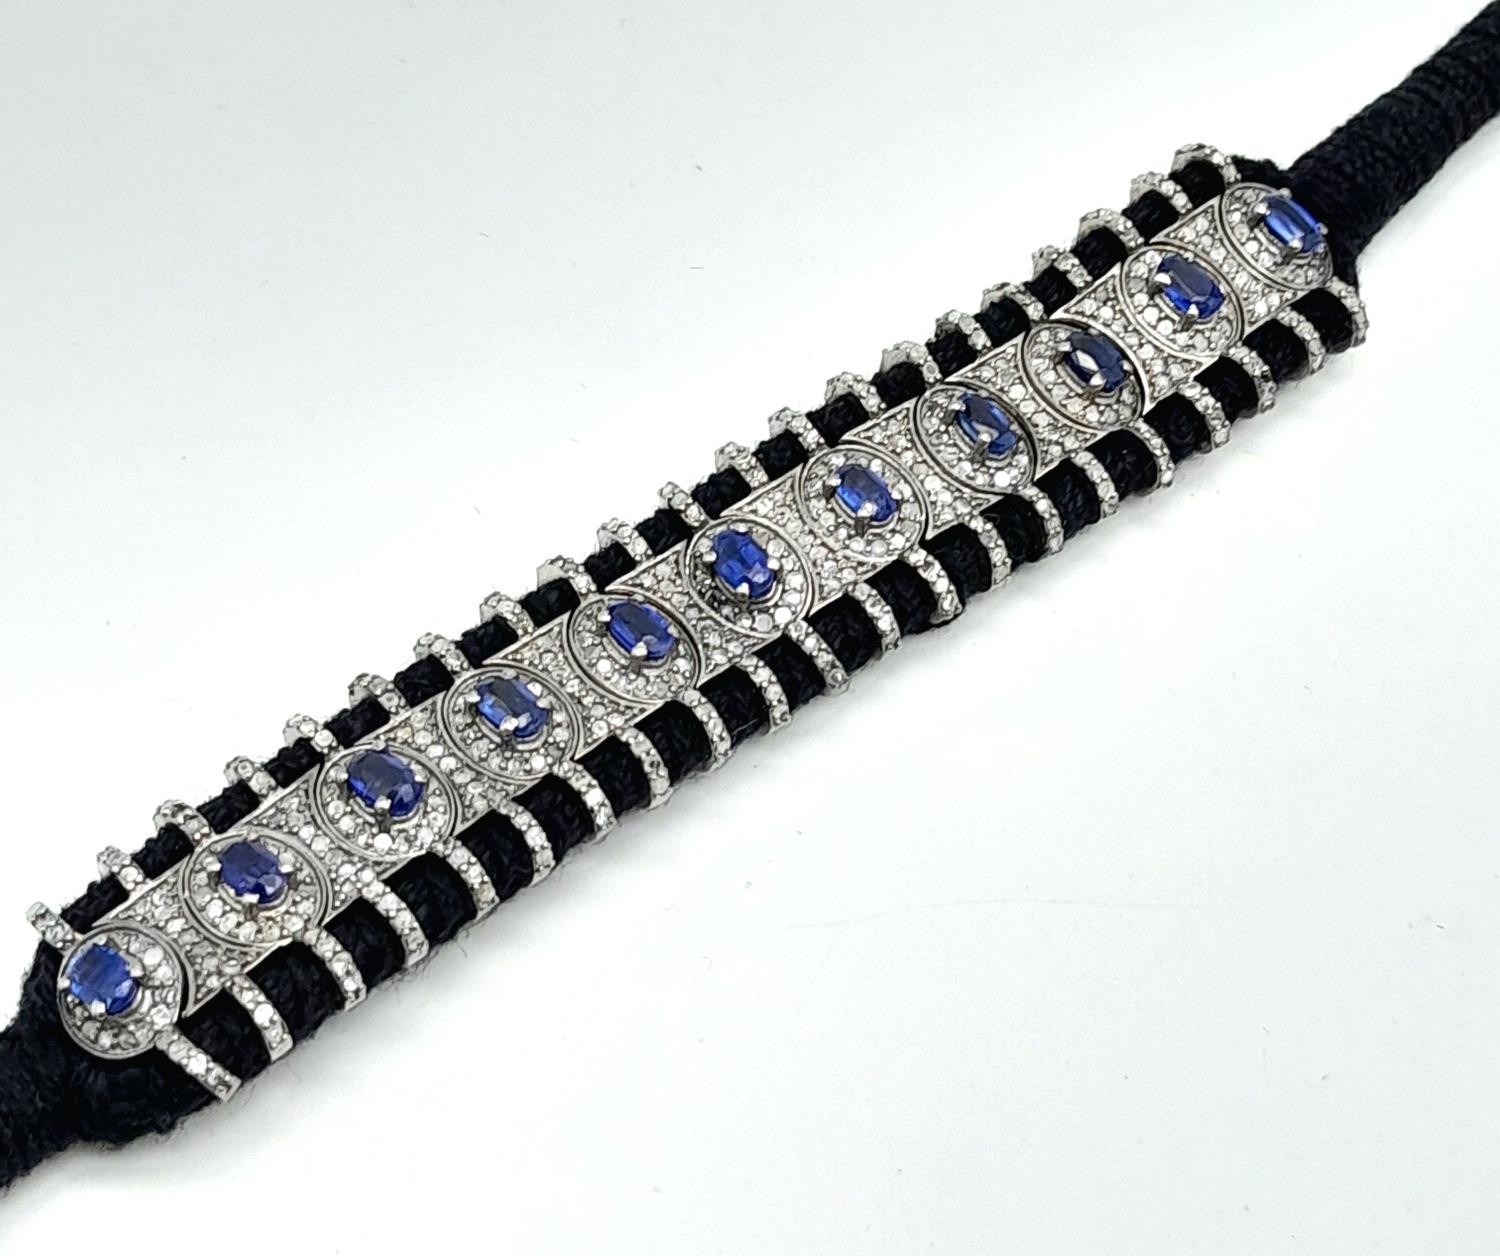 A Hand-Crafted Blue Sapphire and Diamond Encrusted Bracelet. Black textile set. Sapphires - 5ctw. - Image 4 of 8